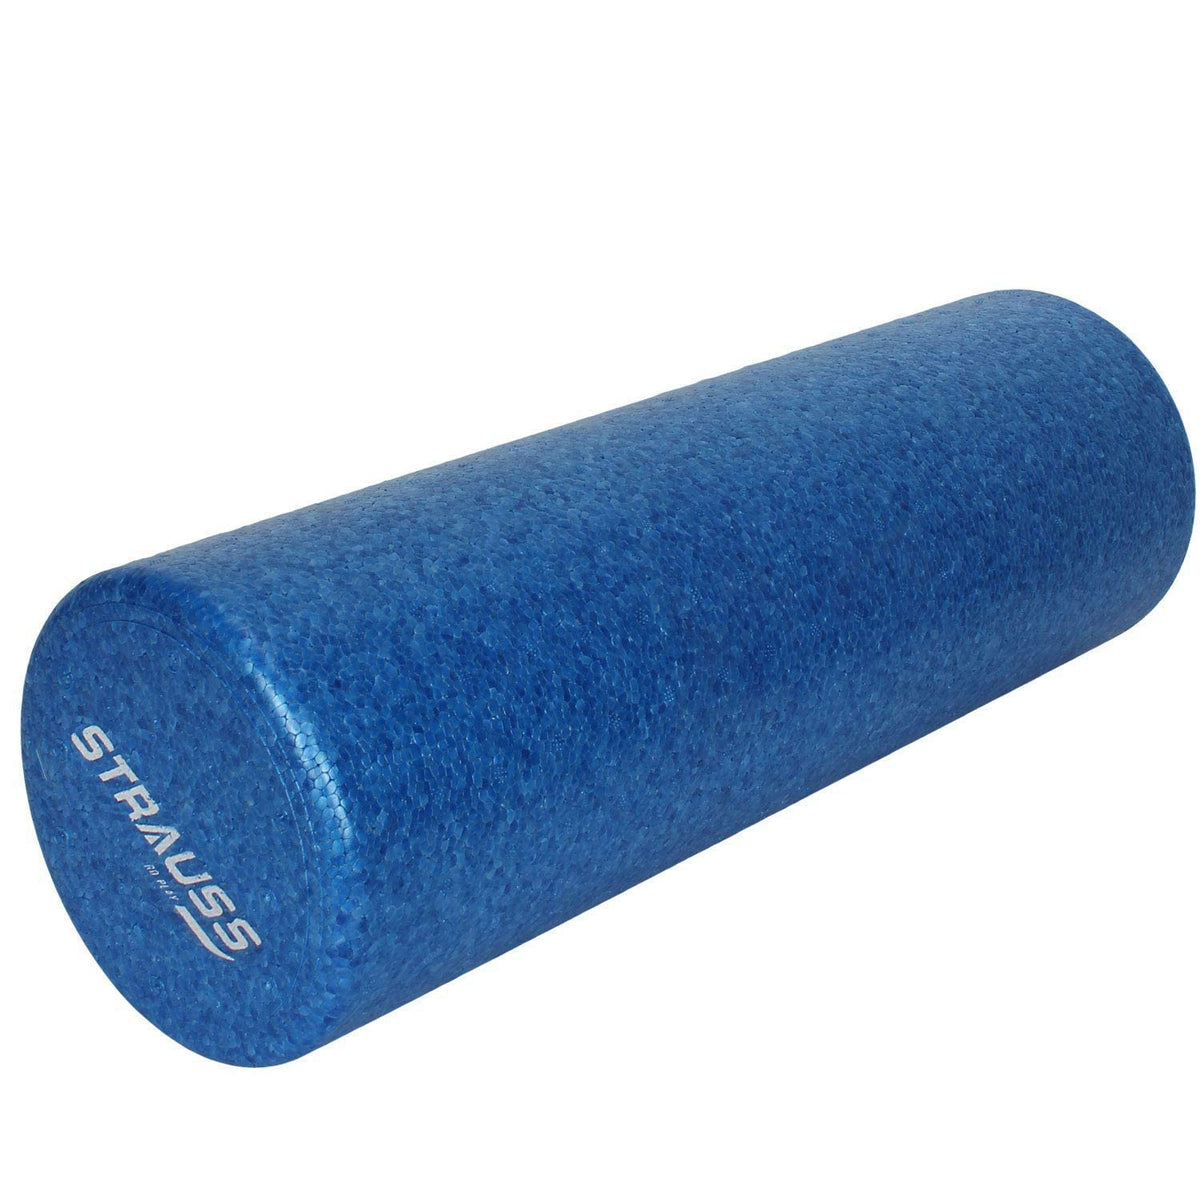 Strauss High Density Foam Roller | Deep Tissue Massage Roller for Knee Exercise, Muscles Recovery & Physiotherapy | Home Gym Fitness Equipment for Full Body Relaxation and Flexibility | 30cm,(Blue)